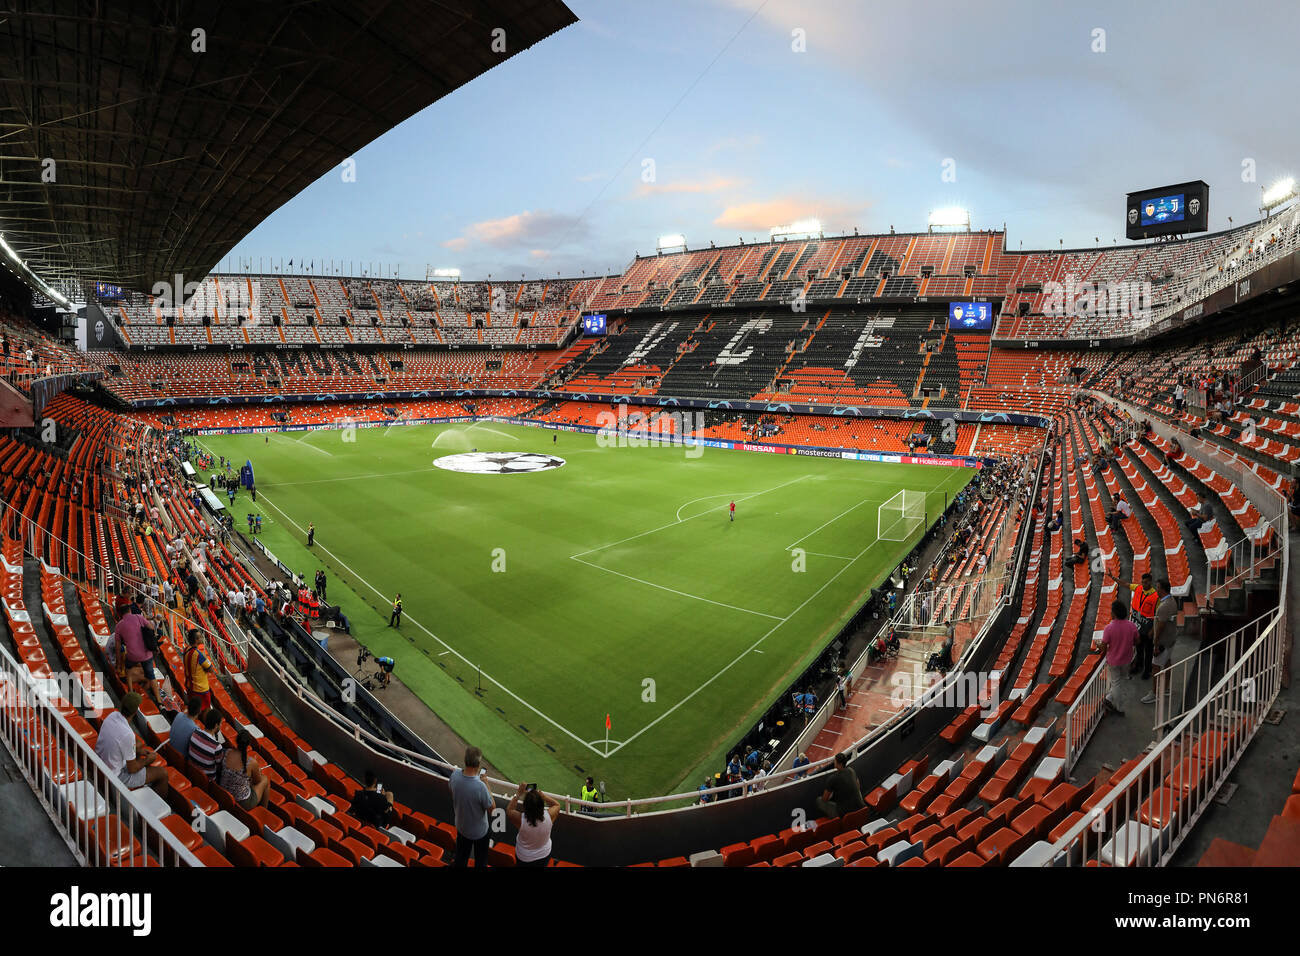 September 19, 2018 - Valencia, Spain - Genaral view of Mestalla Stadium ahead of the UEFA Champions League, Group H football match between Valencia CF and Juventus FC on September 19, 2018 at Mestalla stadium in Valencia, Spain (Credit Image: © Manuel Blondeau via ZUMA Wire) Stock Photo